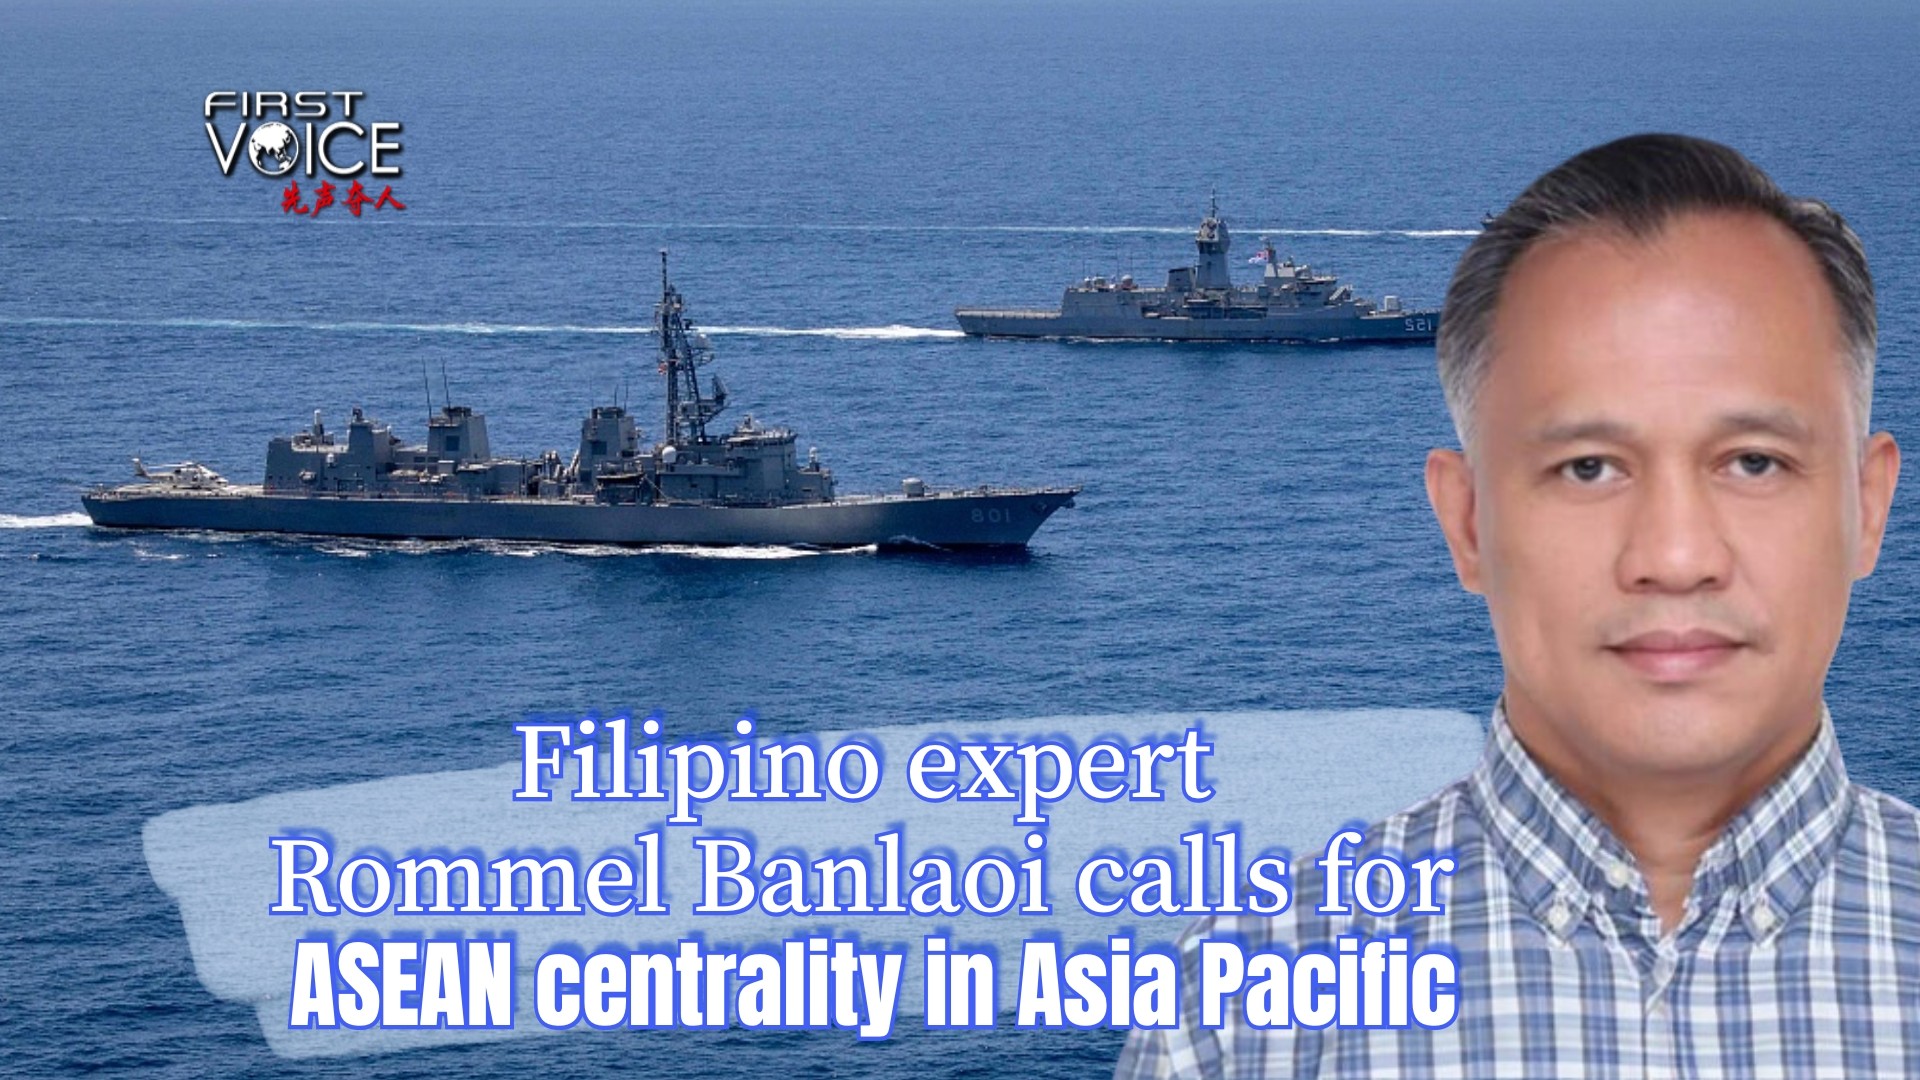 Filipino expert calls for ASEAN centrality in Asia Pacific